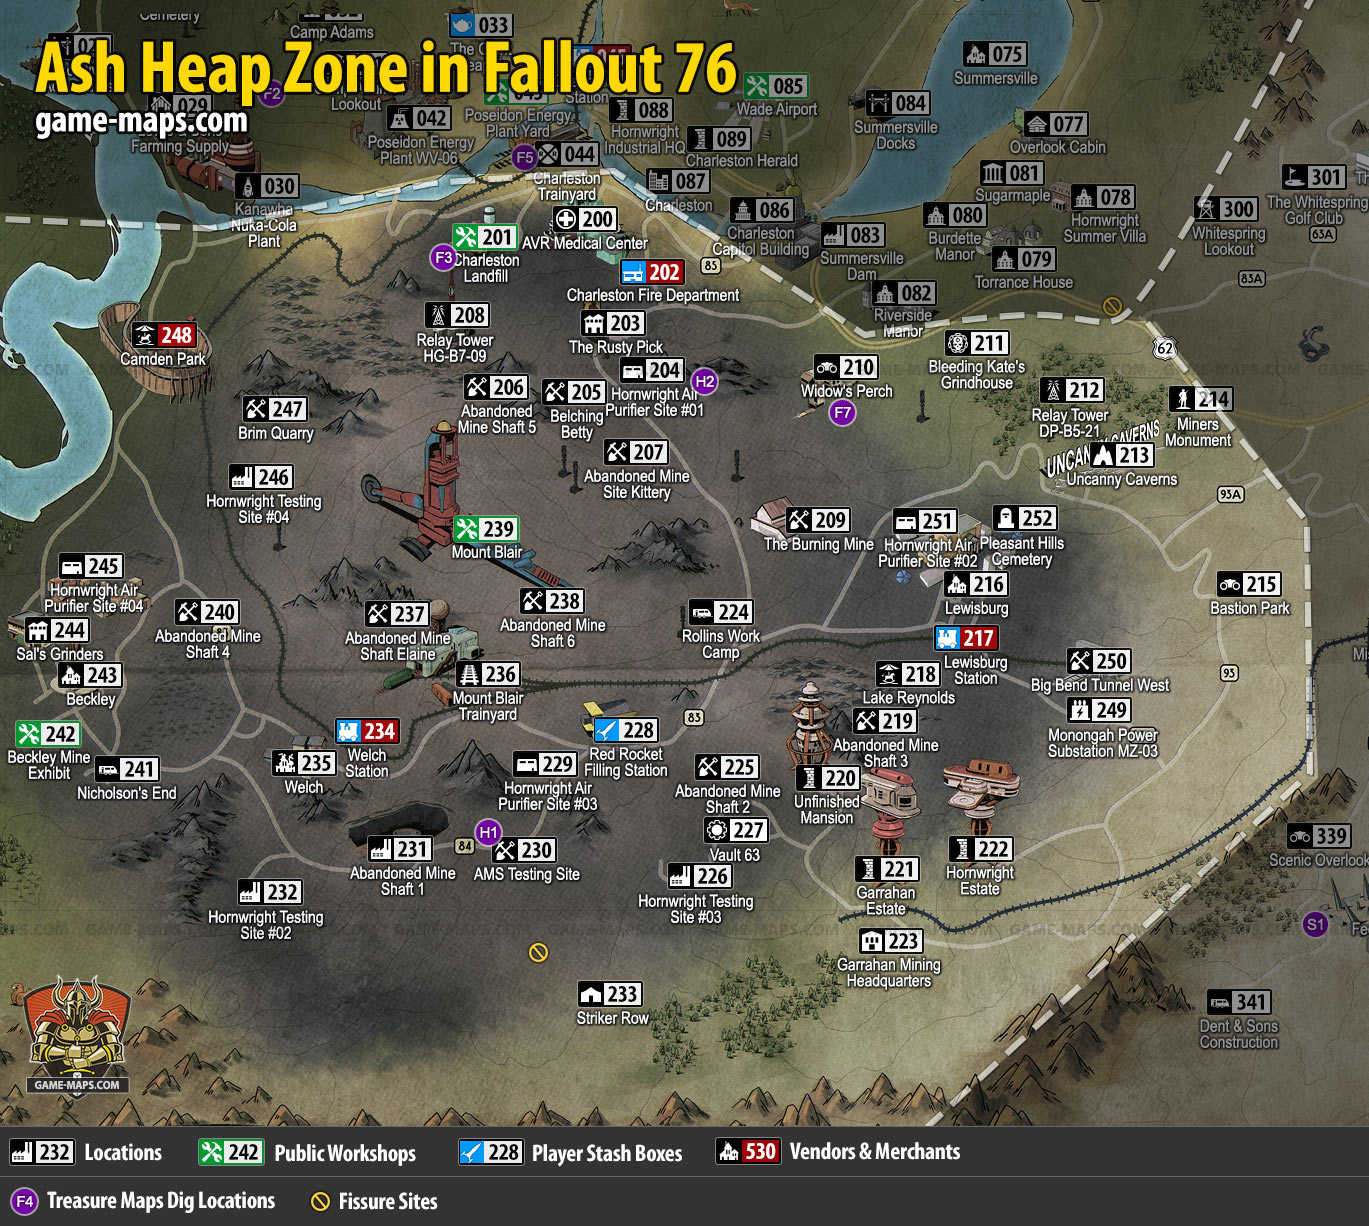 Map of Ash Heap Region for Fallout 76 Video Game.